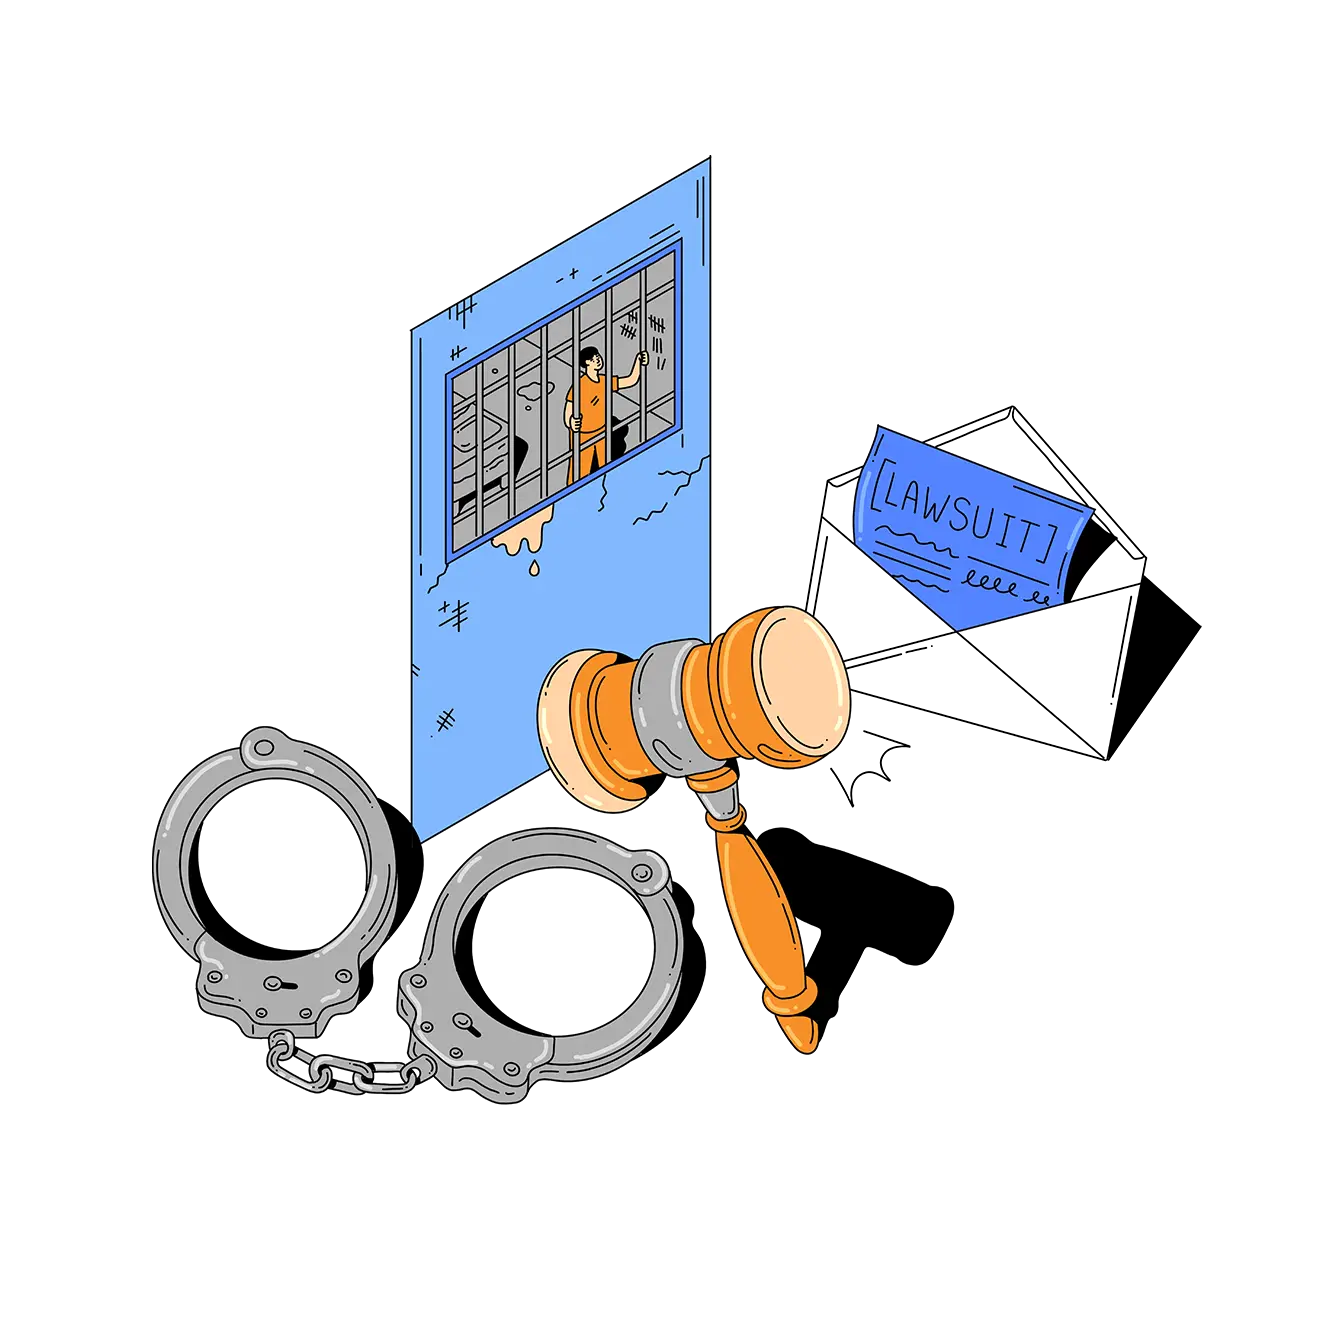 A person in prison, along with large handcuffs, a lawsuit, and a gavel.